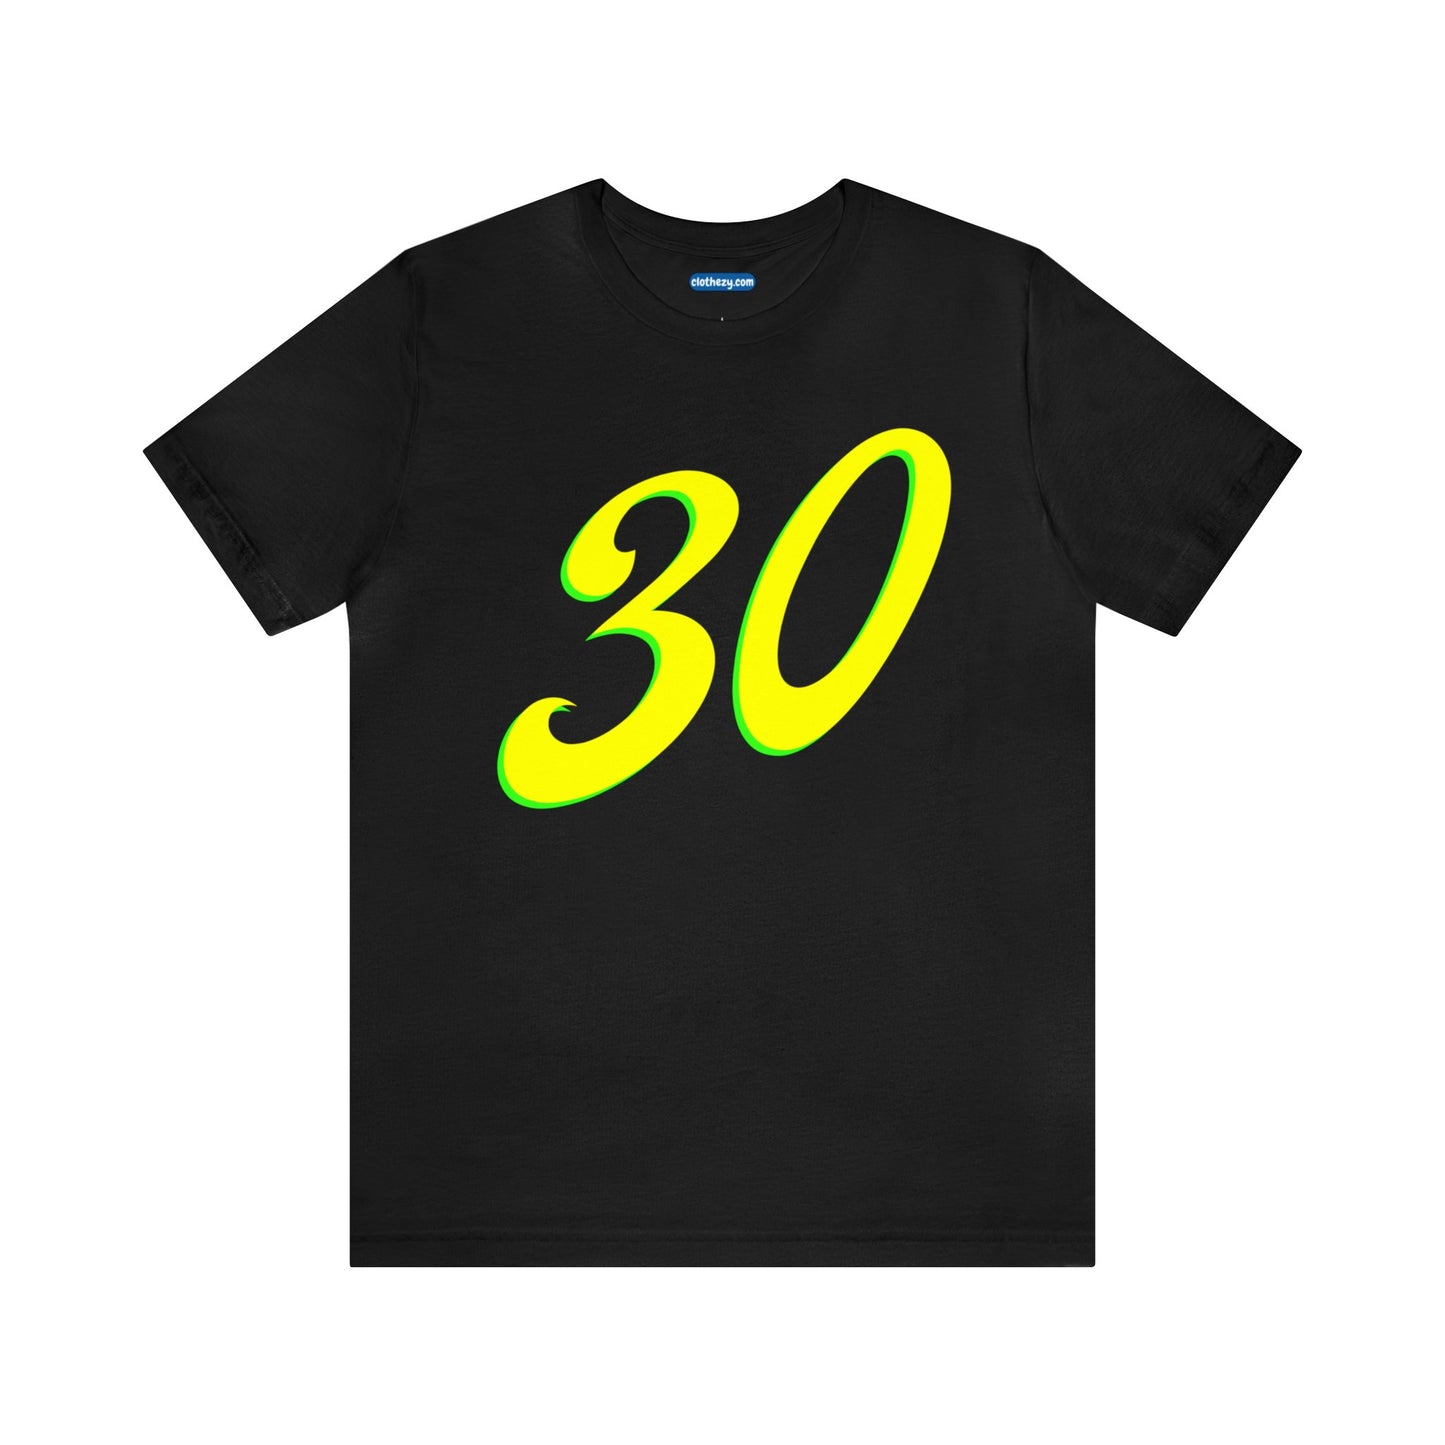 Number 30 Design - Soft Cotton Tee for birthdays and celebrations, Gift for friends and family, Multiple Options by clothezy.com in Dark Grey Heather Size Small - Buy Now